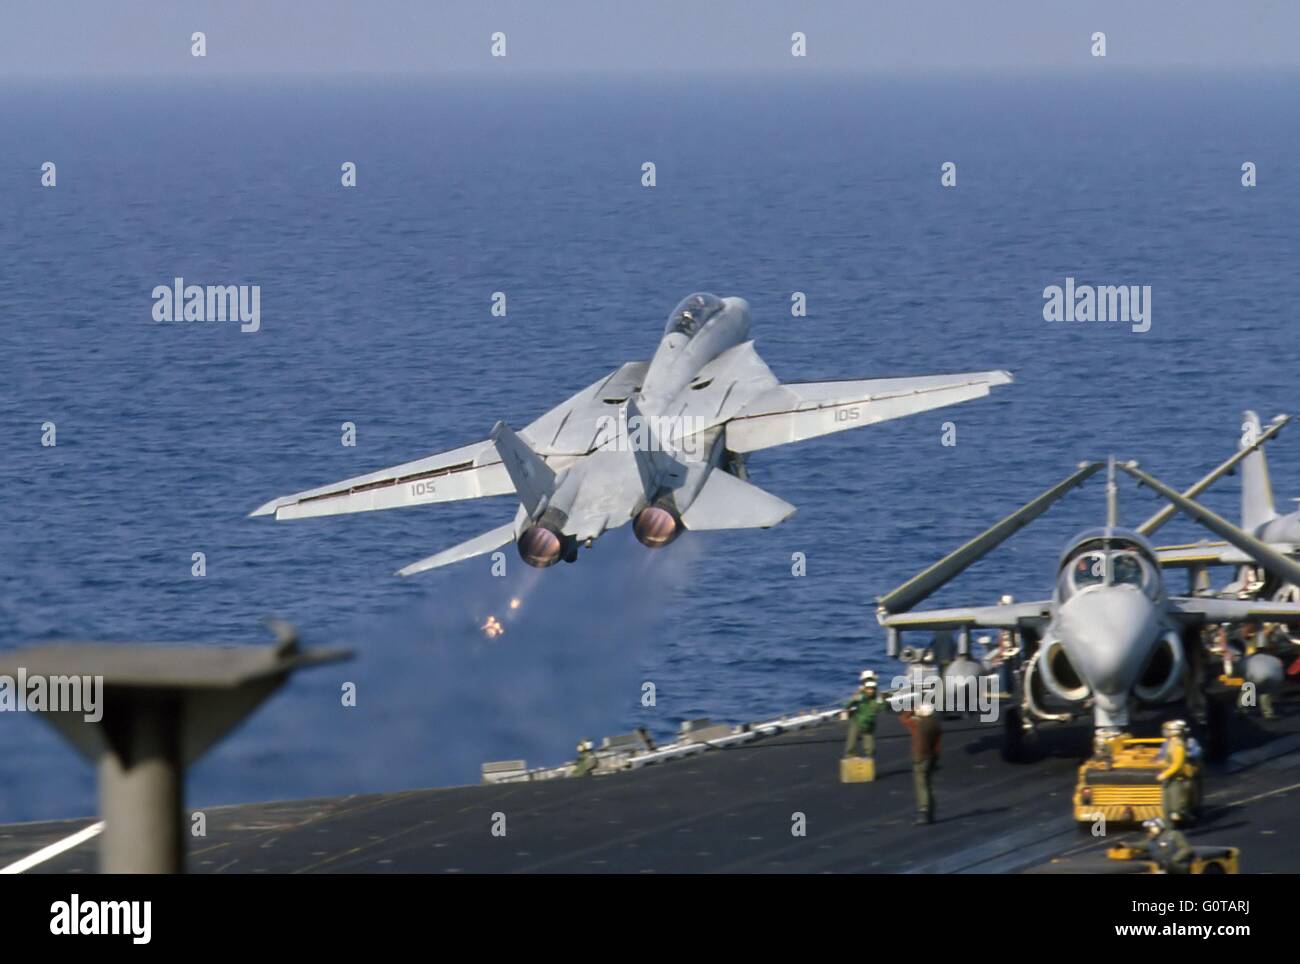 US NAVY, launch of a F 14 'HTomcat' fighter aircraft from Kennedy aircraft carrier in Mediterranean Sea Stock Photo